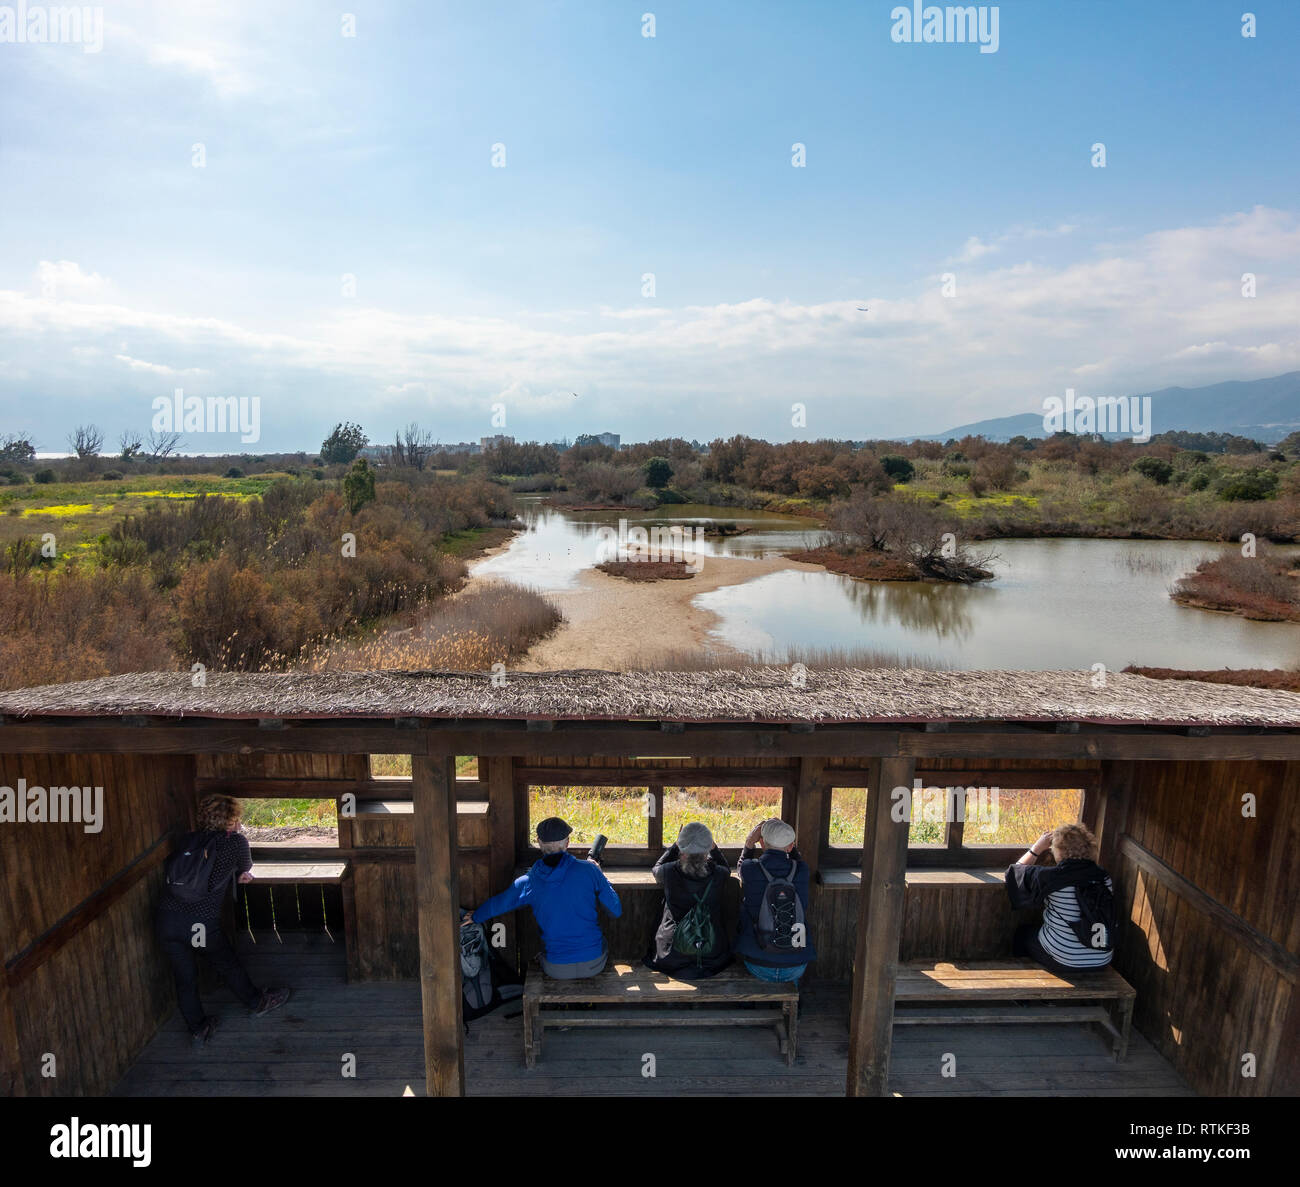 Birdwatchers Birdwatching British tourists expats Bird watching from hide Guadalhorce River Estuary Natural Area Malaga Costa del Sol Spain in winter Stock Photo